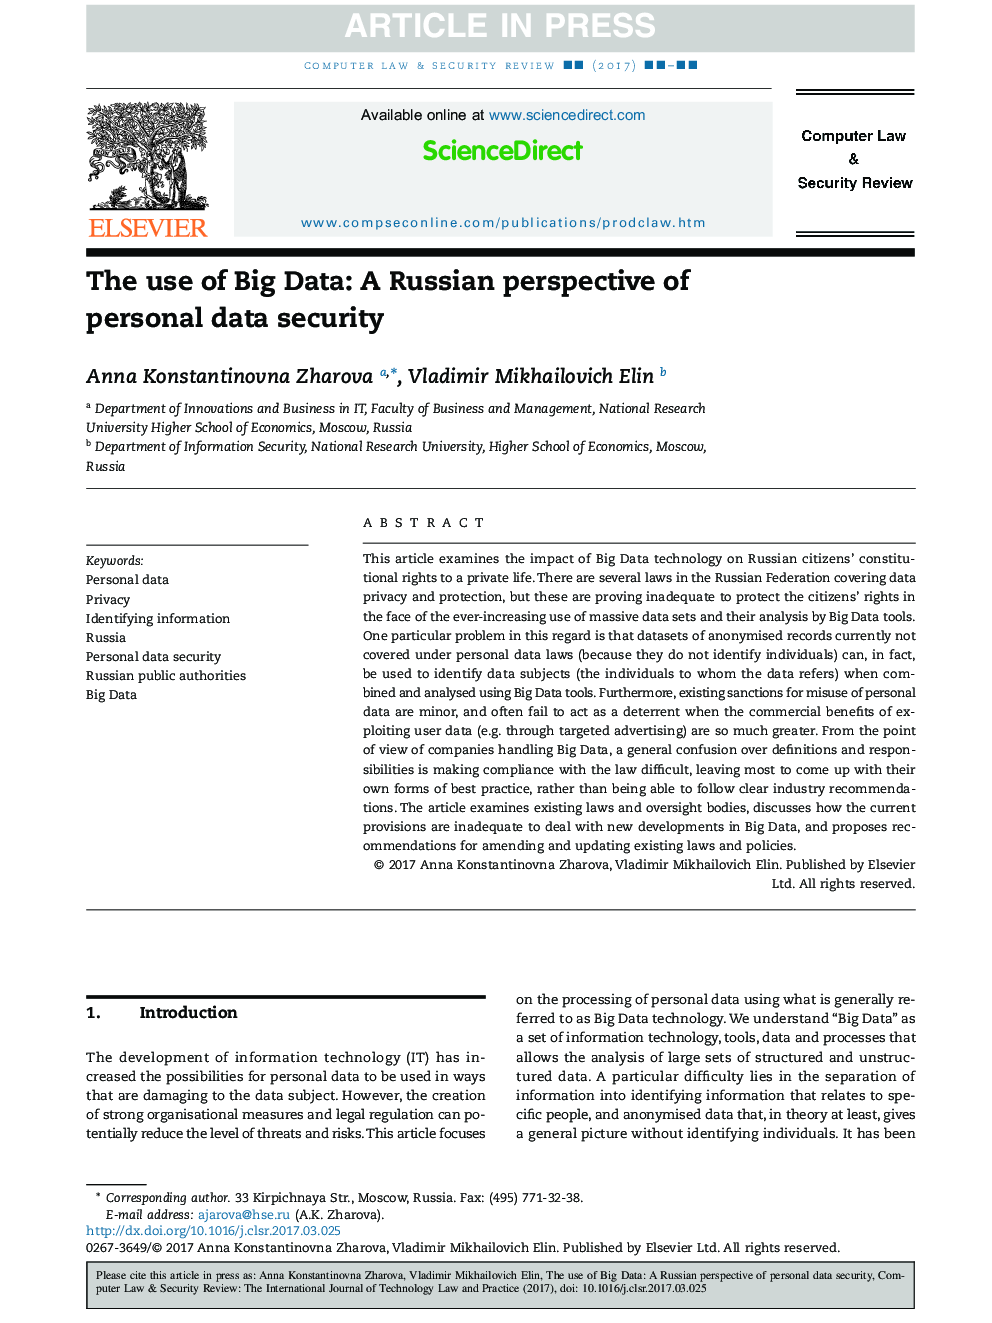 The use of Big Data: A Russian perspective of personal data security